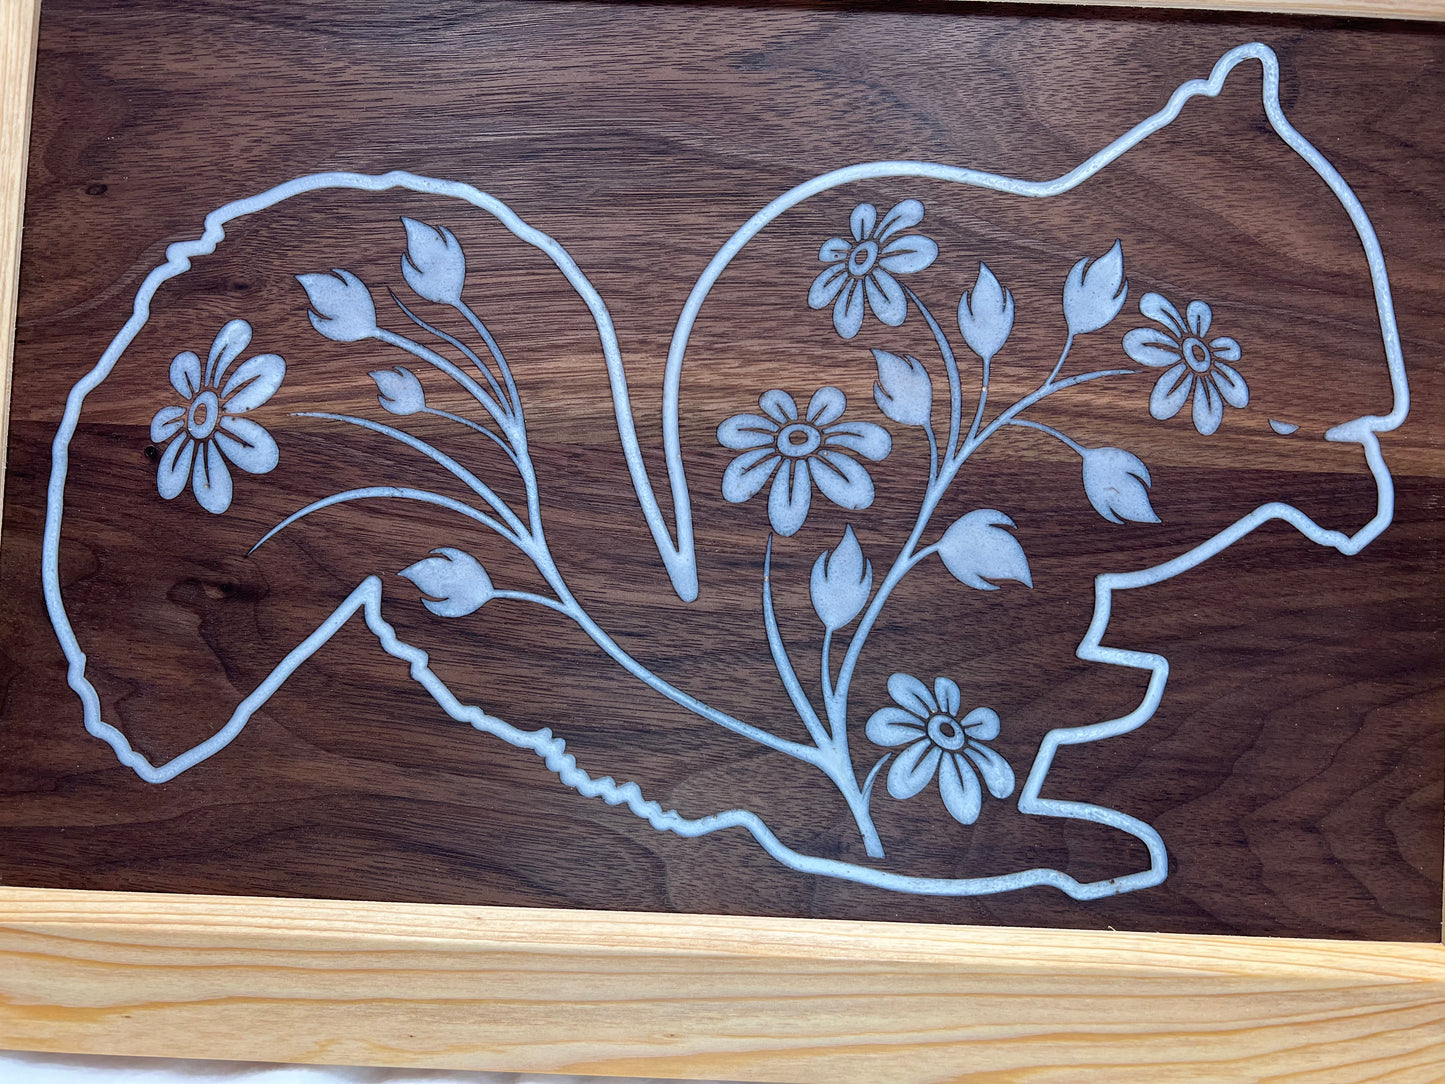 Walnut Squirrel with Flowers in Cypress Frame